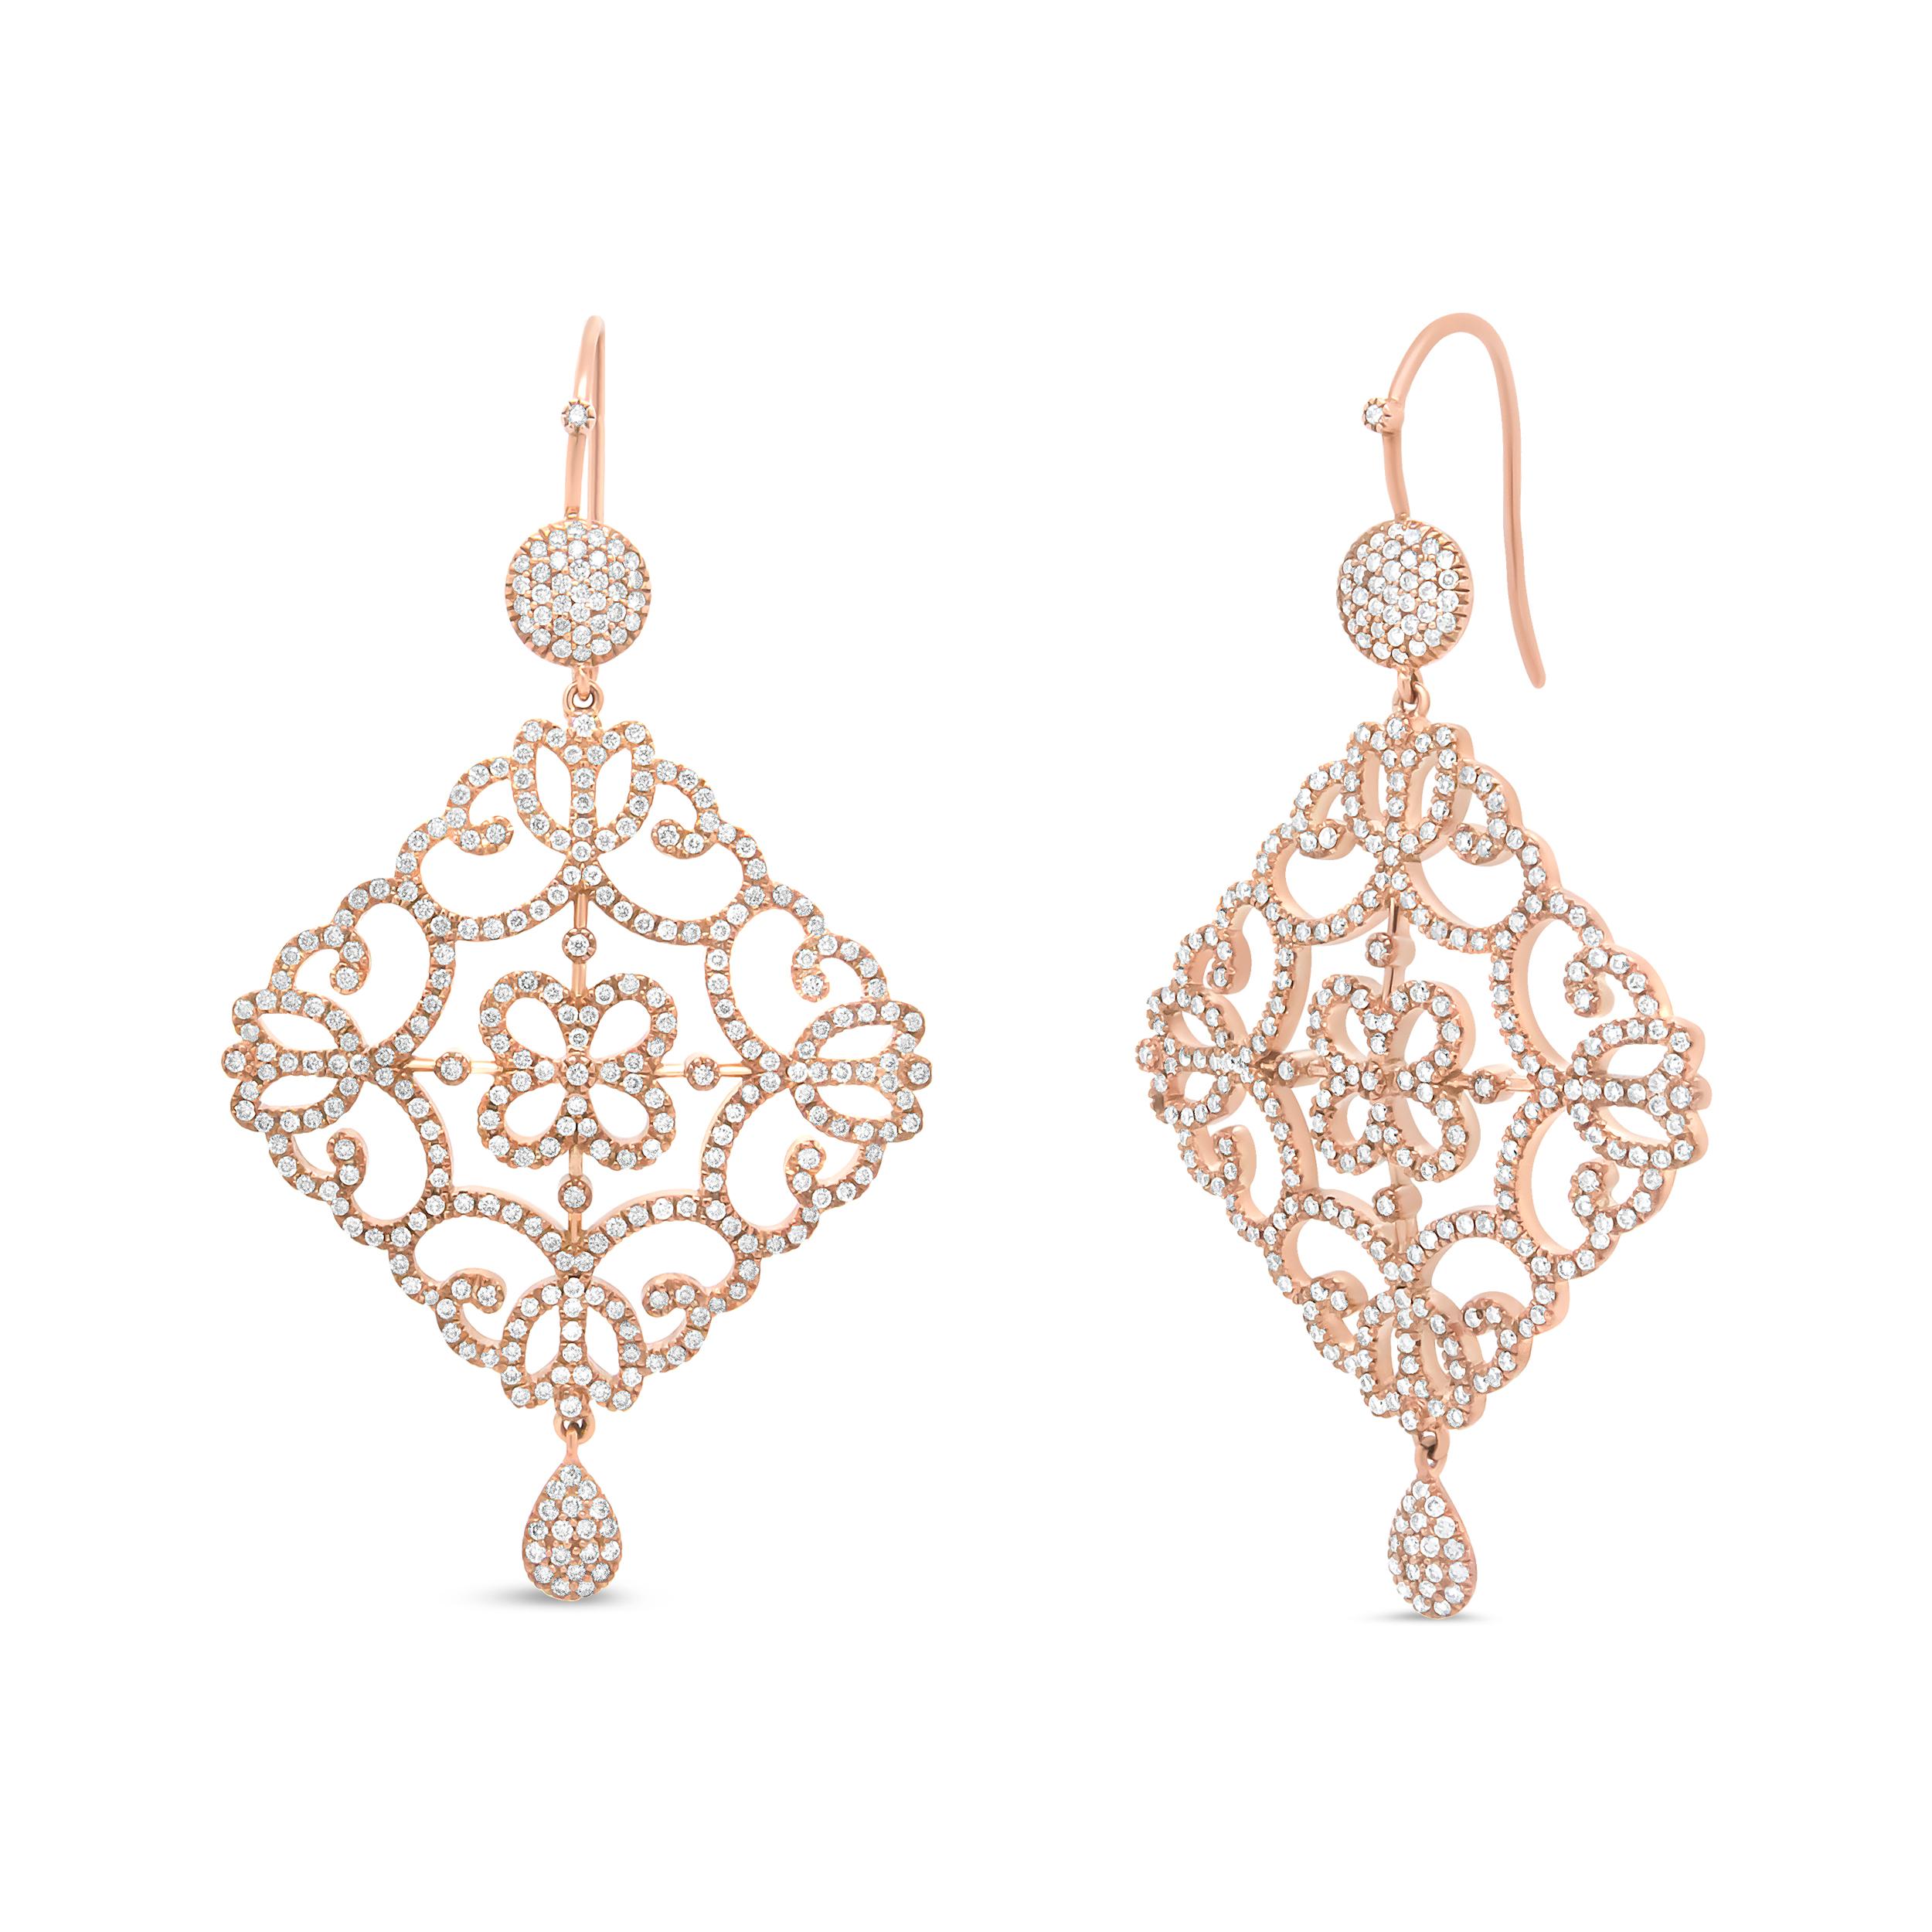 A feminine energy ignites the look of these gorgeous dangle drop earrings crafted from genuine 18k rose gold. An incredible sparkle emanates from the 620 round white diamonds that glisten from their prong settings. These glittering stones total 3